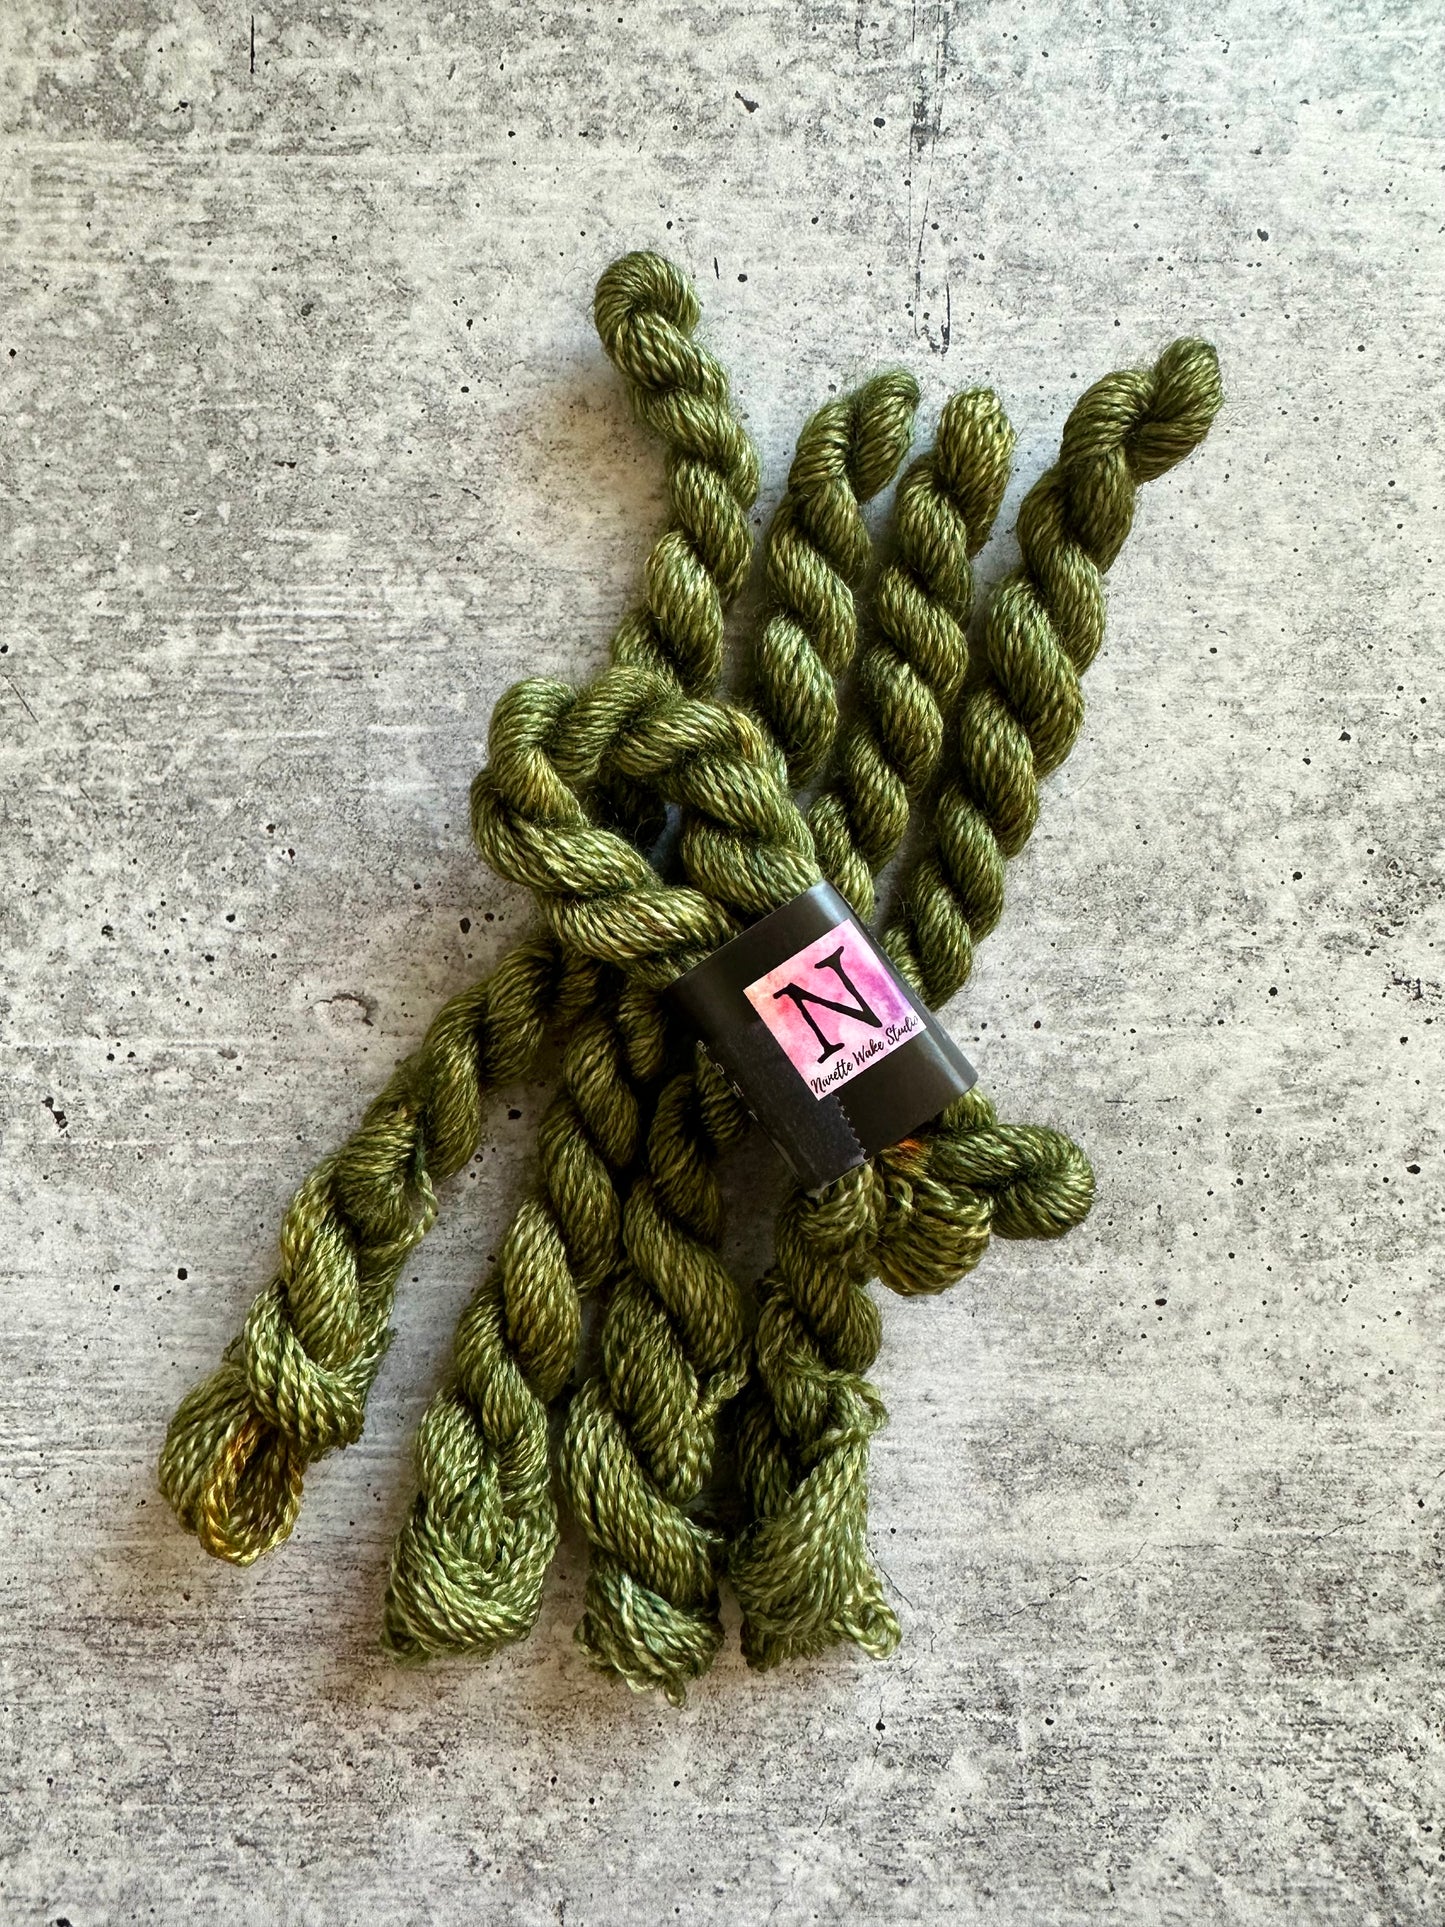 Olive Drab Embroidery Thread